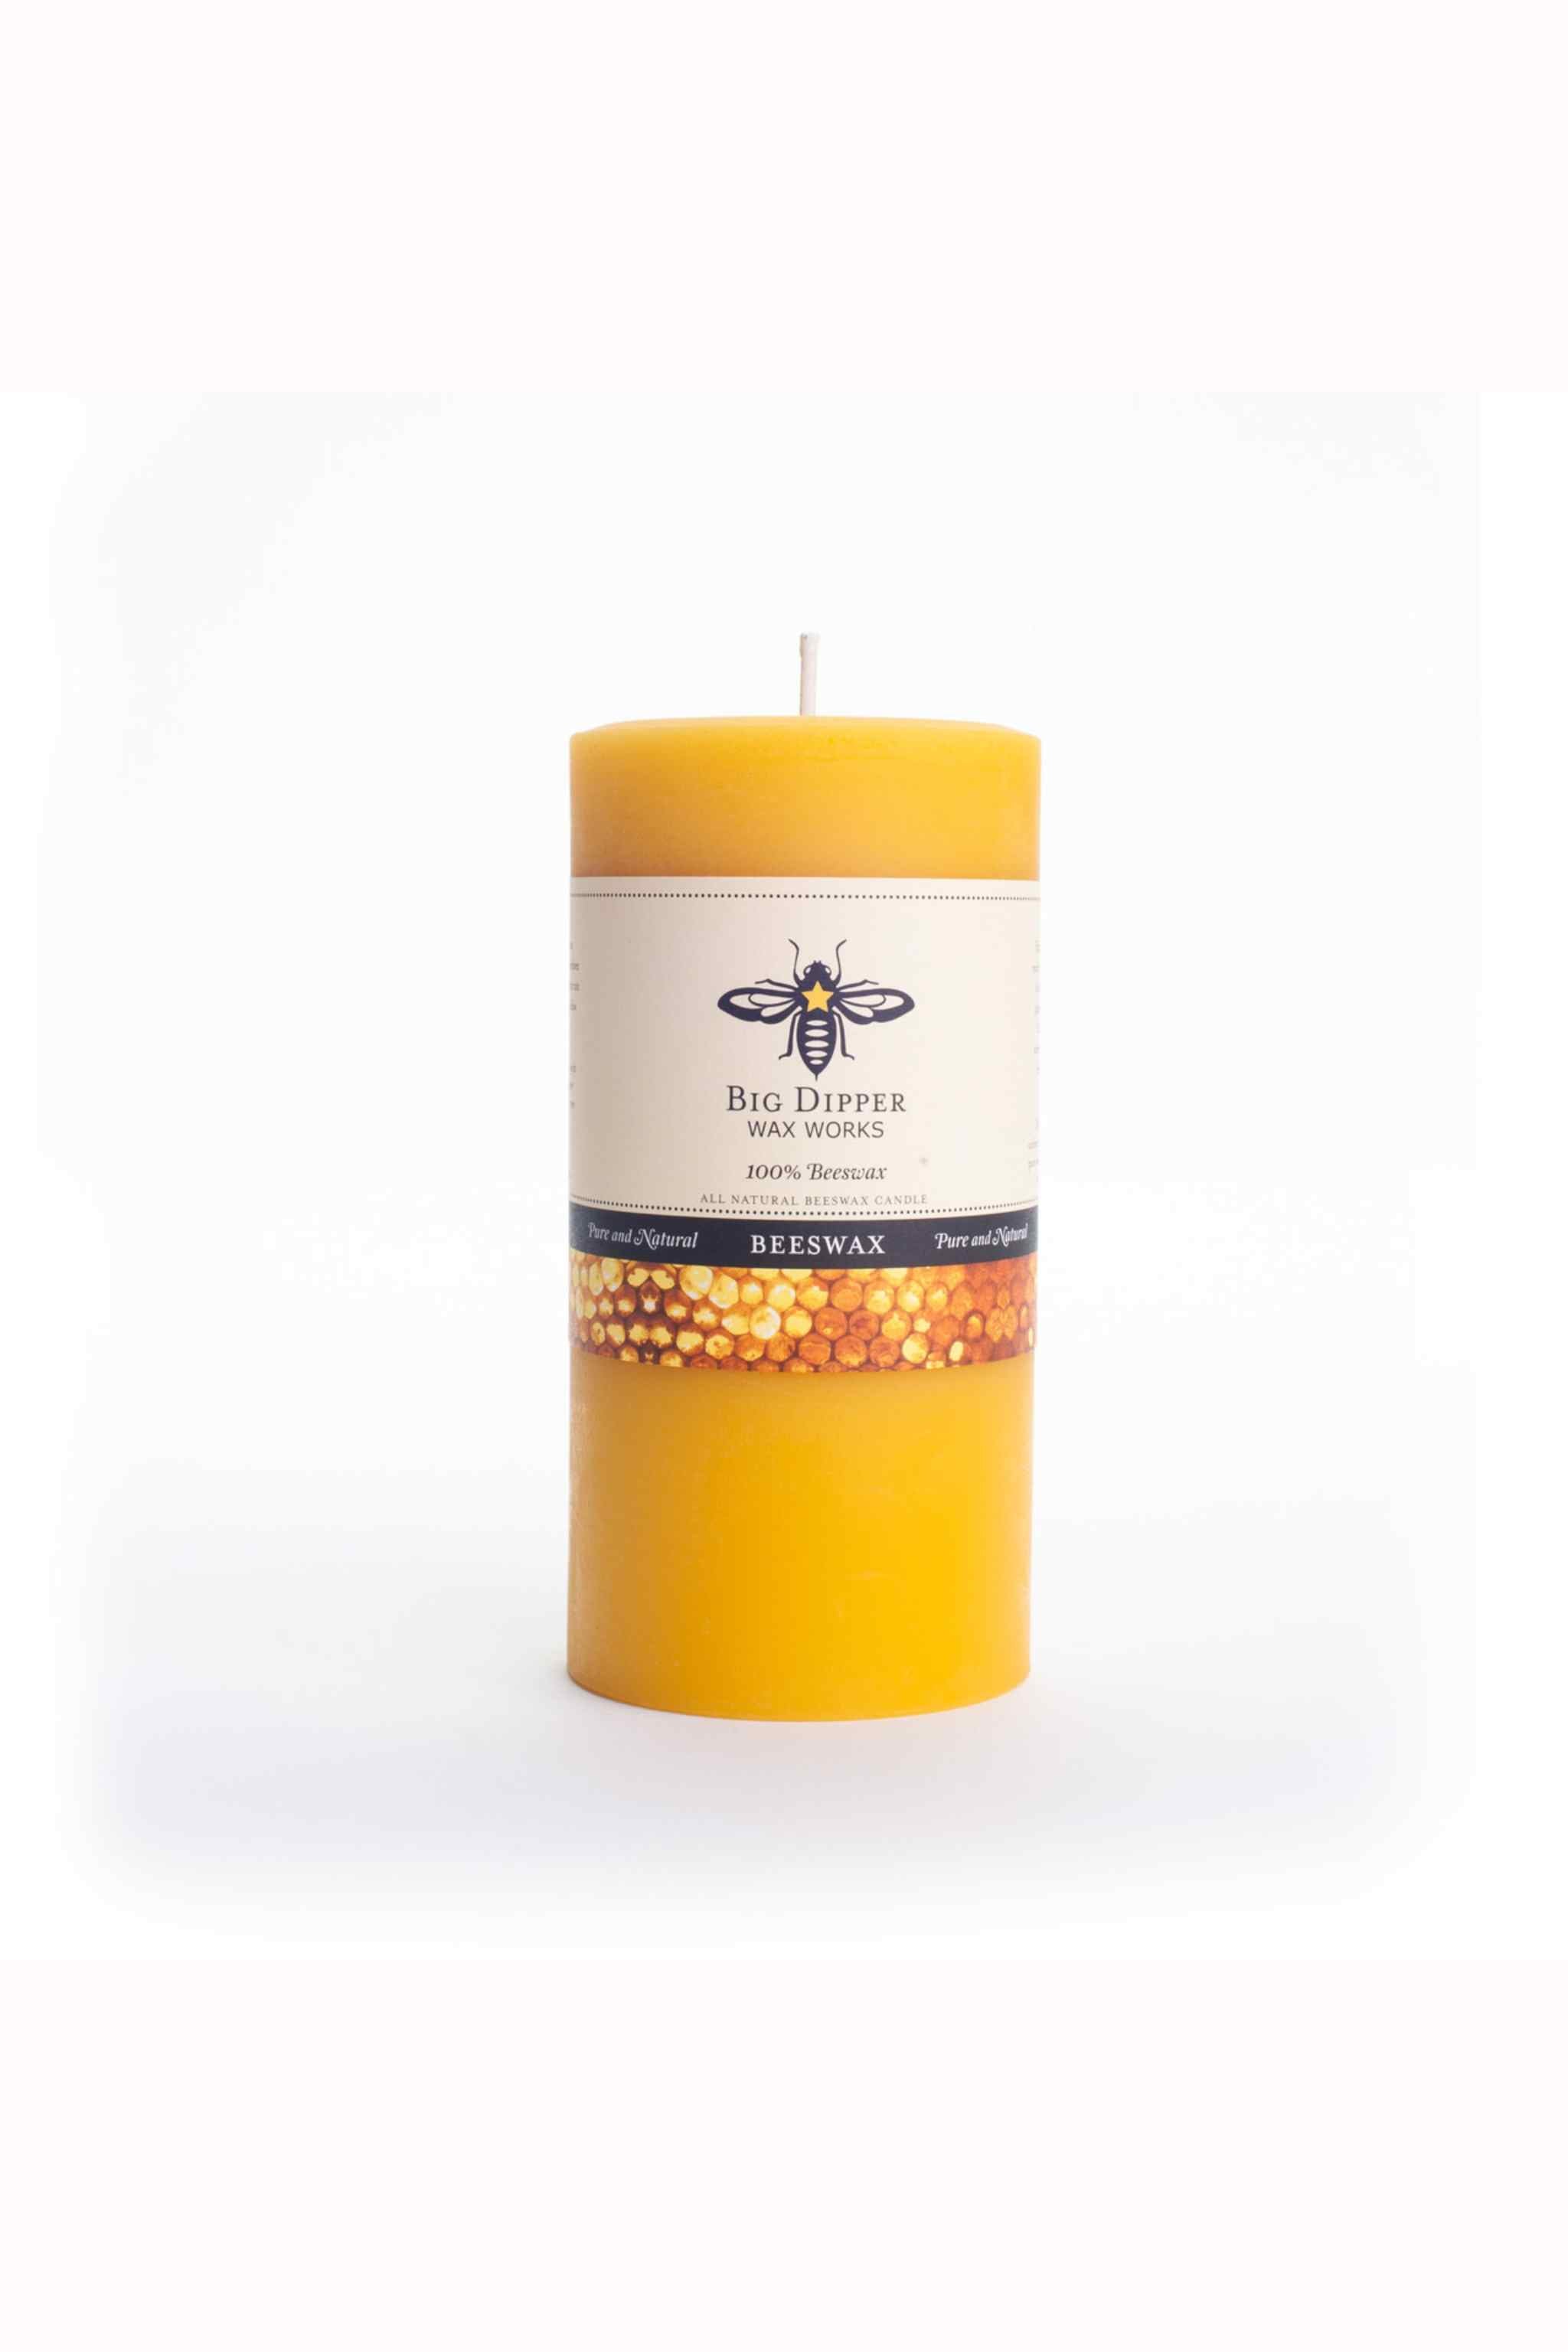 Thé Blanc Beeswax Candle, Organic Pure Beeswax, 16oz